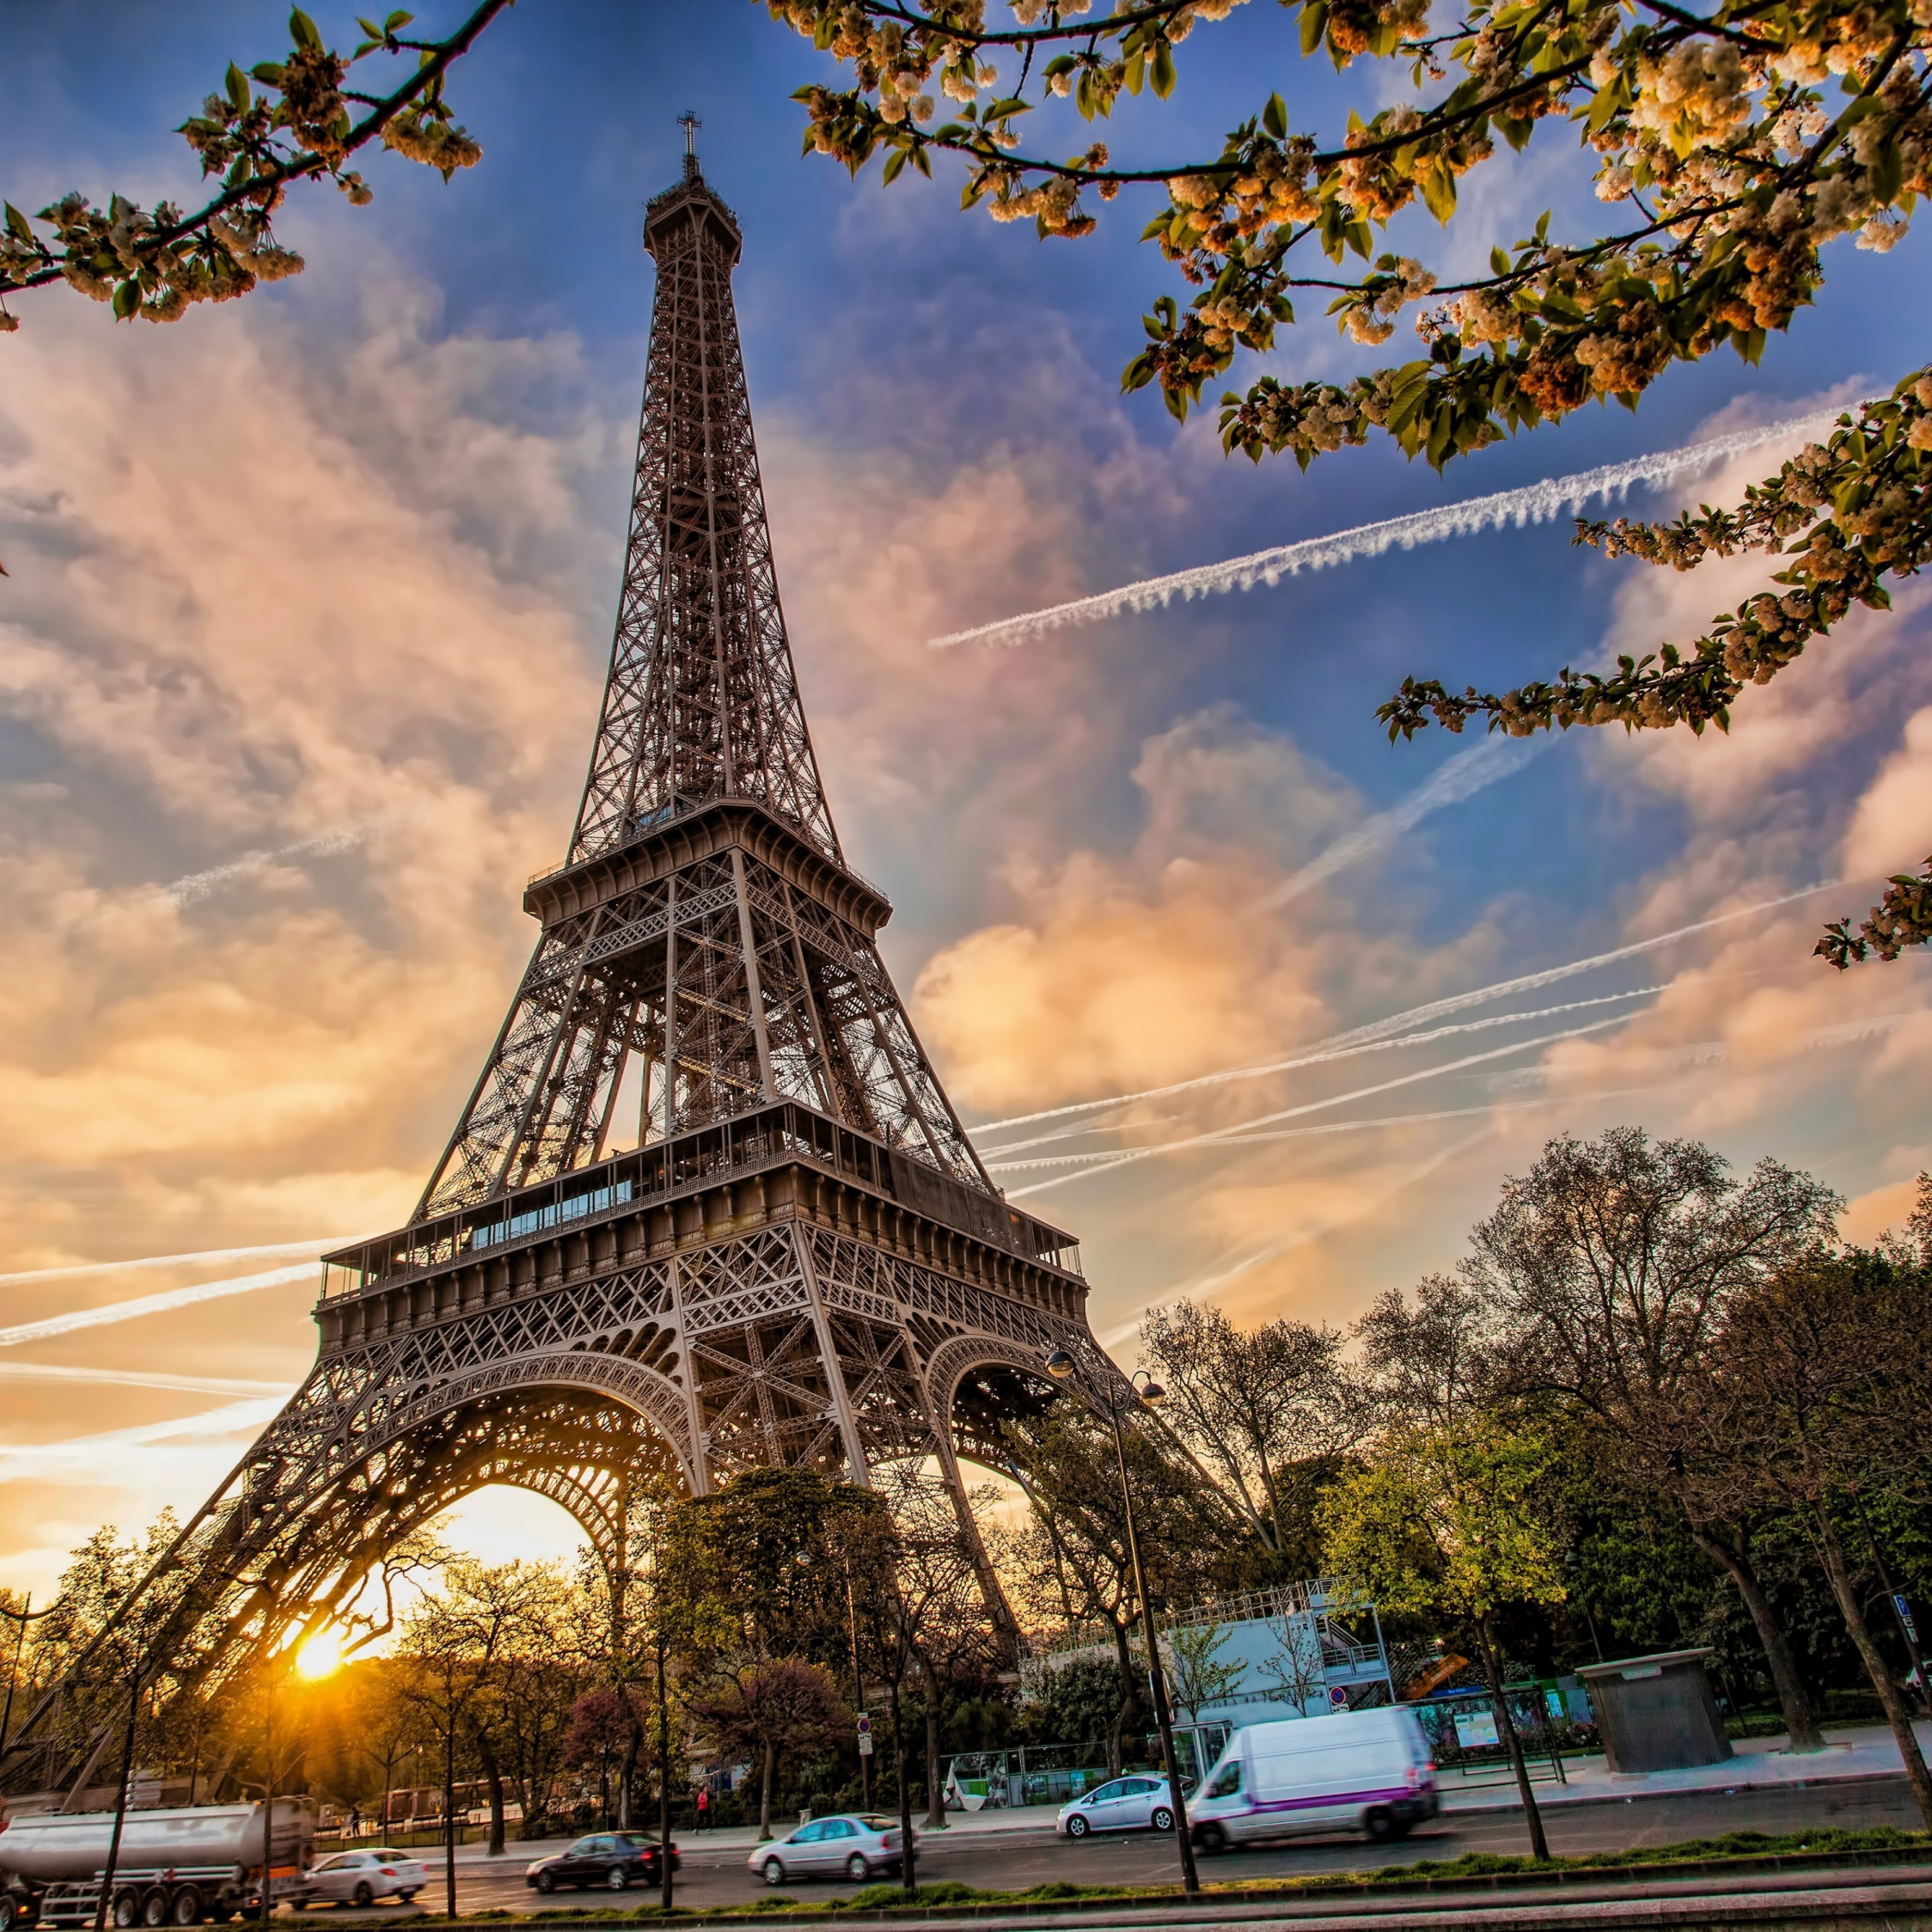 1080p Images: Eiffel Tower Wallpaper Hd For Ipad